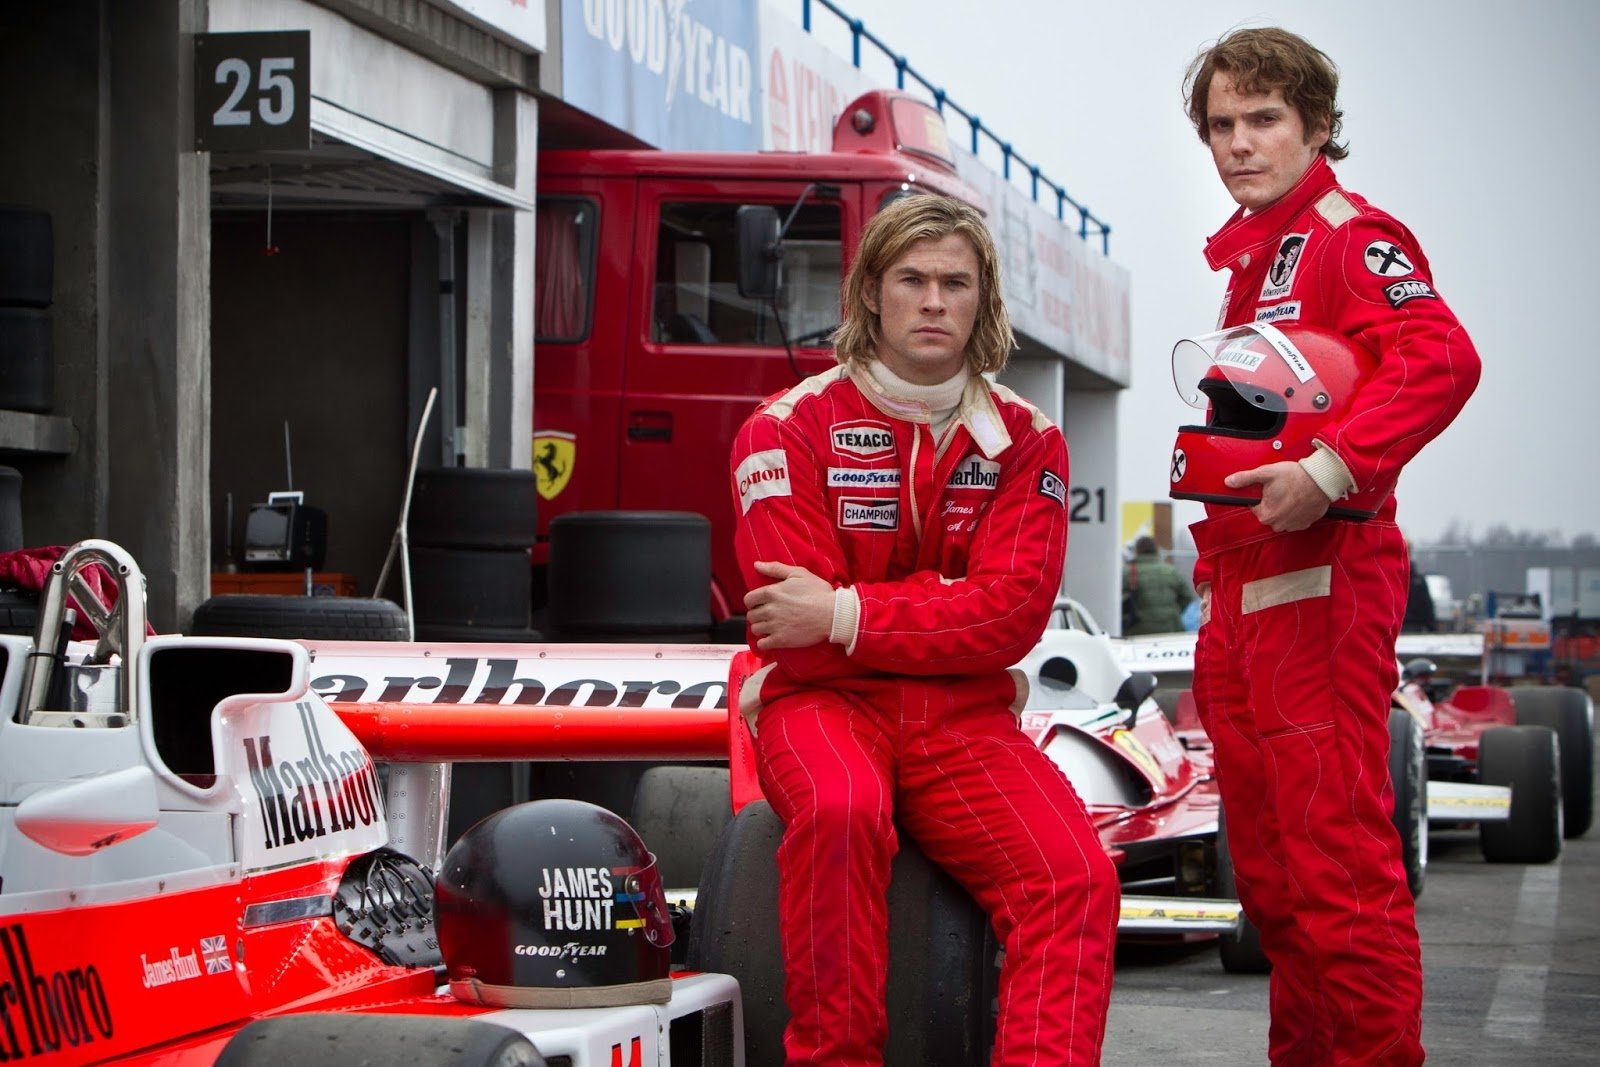 HD wallpaper from Rush (2013) featuring actors in racing suits beside a Formula One car with James Hunt text.